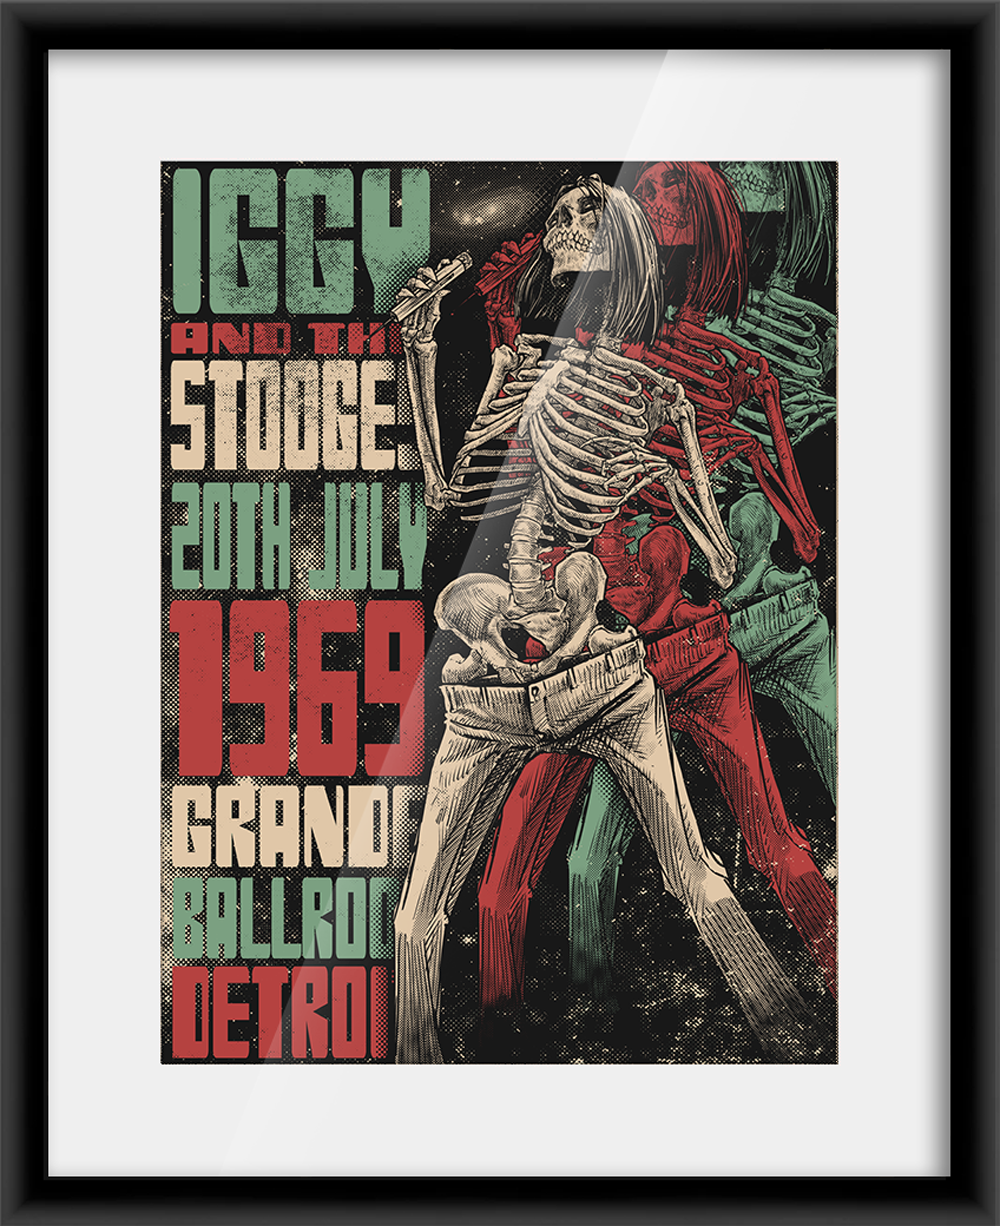 Iggy and The Stooges Detroit 1969 (Main Edition)